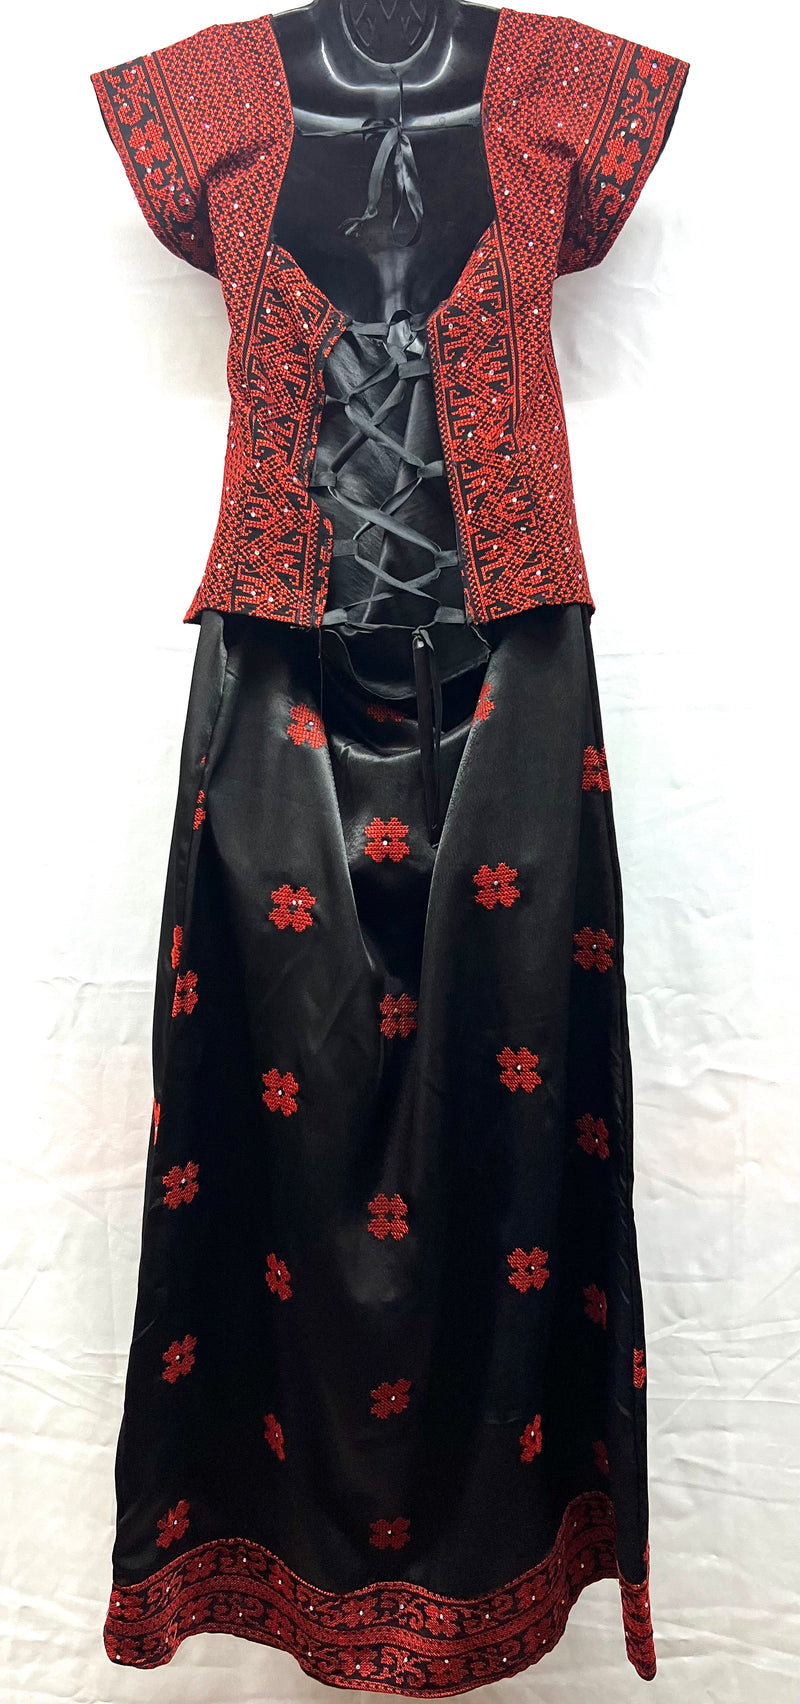 indian style 3pc embroidered dress with chiffon scarf & lace up fabric shirt & satin skirt black with red stitching & rhinestones sizes [2]